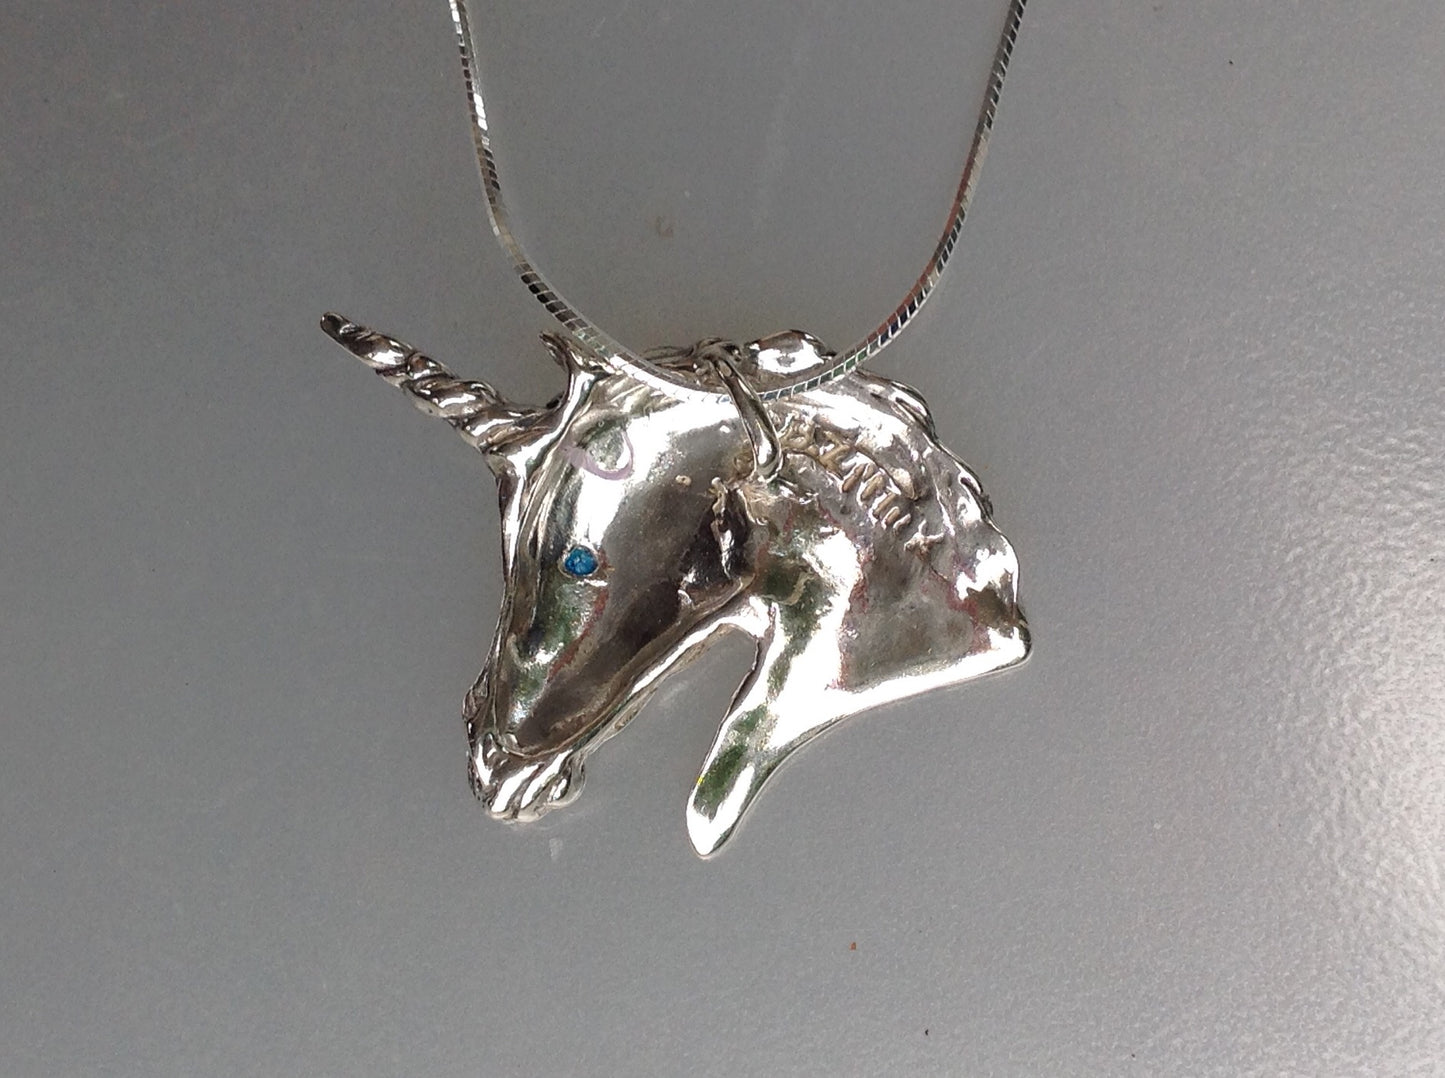 Unicorn Sterling Silver Pendant, stone set eye. Large. Chain included.